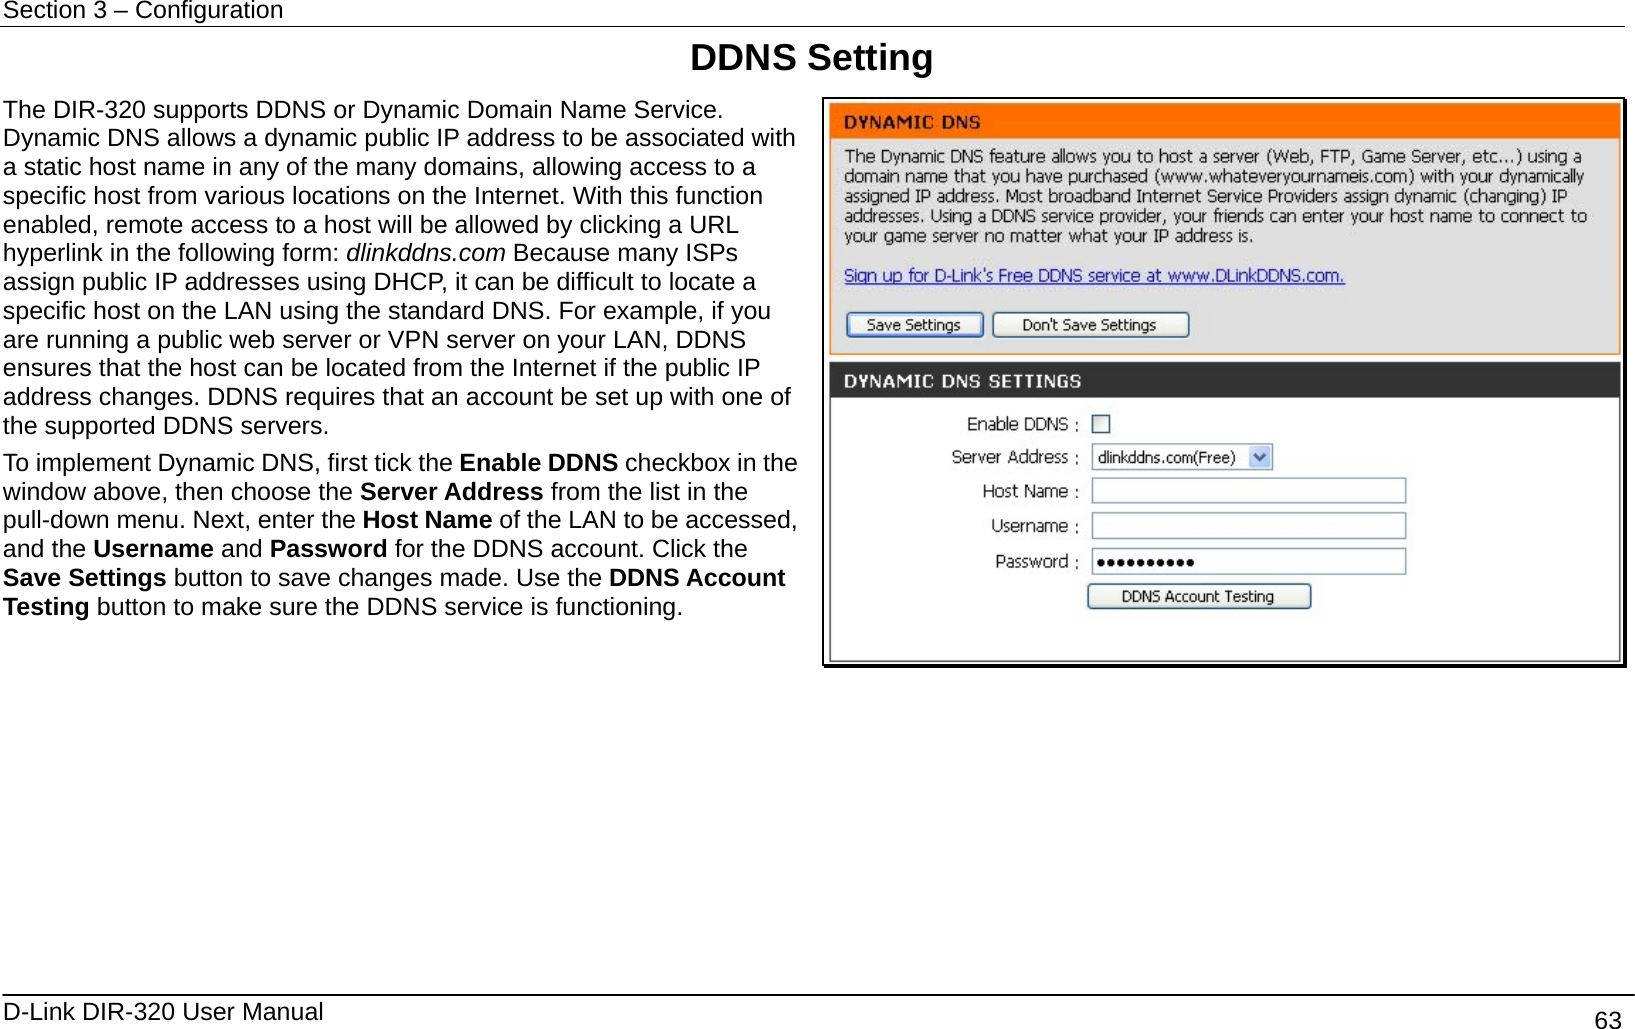 Section 3 – Configuration   D-Link DIR-320 User Manual                                       63 DDNS Setting The DIR-320 supports DDNS or Dynamic Domain Name Service. Dynamic DNS allows a dynamic public IP address to be associated with a static host name in any of the many domains, allowing access to a specific host from various locations on the Internet. With this function enabled, remote access to a host will be allowed by clicking a URL hyperlink in the following form: dlinkddns.com Because many ISPs assign public IP addresses using DHCP, it can be difficult to locate a specific host on the LAN using the standard DNS. For example, if you are running a public web server or VPN server on your LAN, DDNS ensures that the host can be located from the Internet if the public IP address changes. DDNS requires that an account be set up with one of the supported DDNS servers. To implement Dynamic DNS, first tick the Enable DDNS checkbox in the window above, then choose the Server Address from the list in the pull-down menu. Next, enter the Host Name of the LAN to be accessed, and the Username and Password for the DDNS account. Click the Save Settings button to save changes made. Use the DDNS Account Testing button to make sure the DDNS service is functioning.        